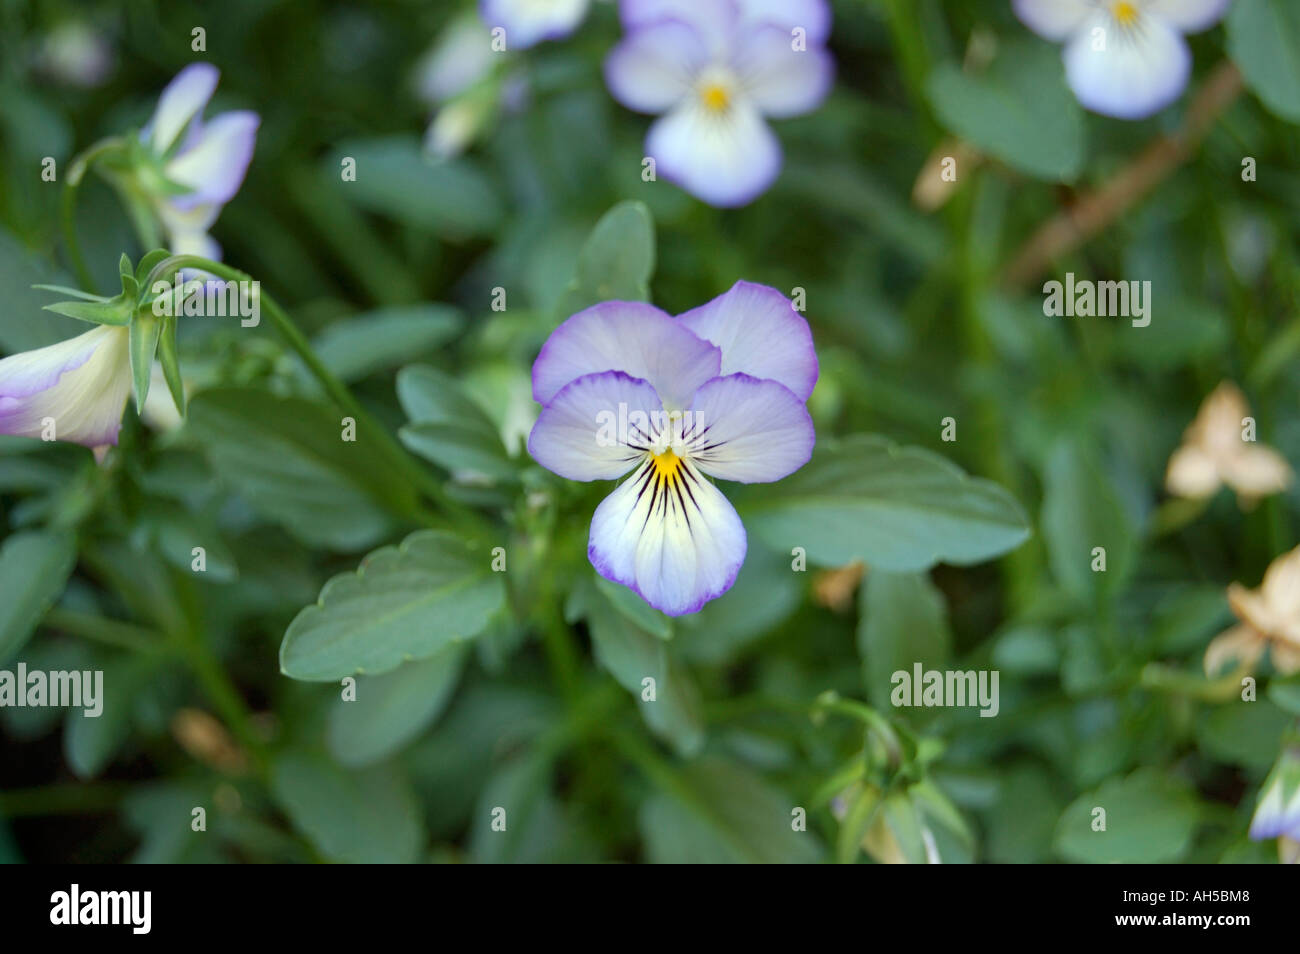 Viola Magnifico perennial flowers in bloom Stock Photo